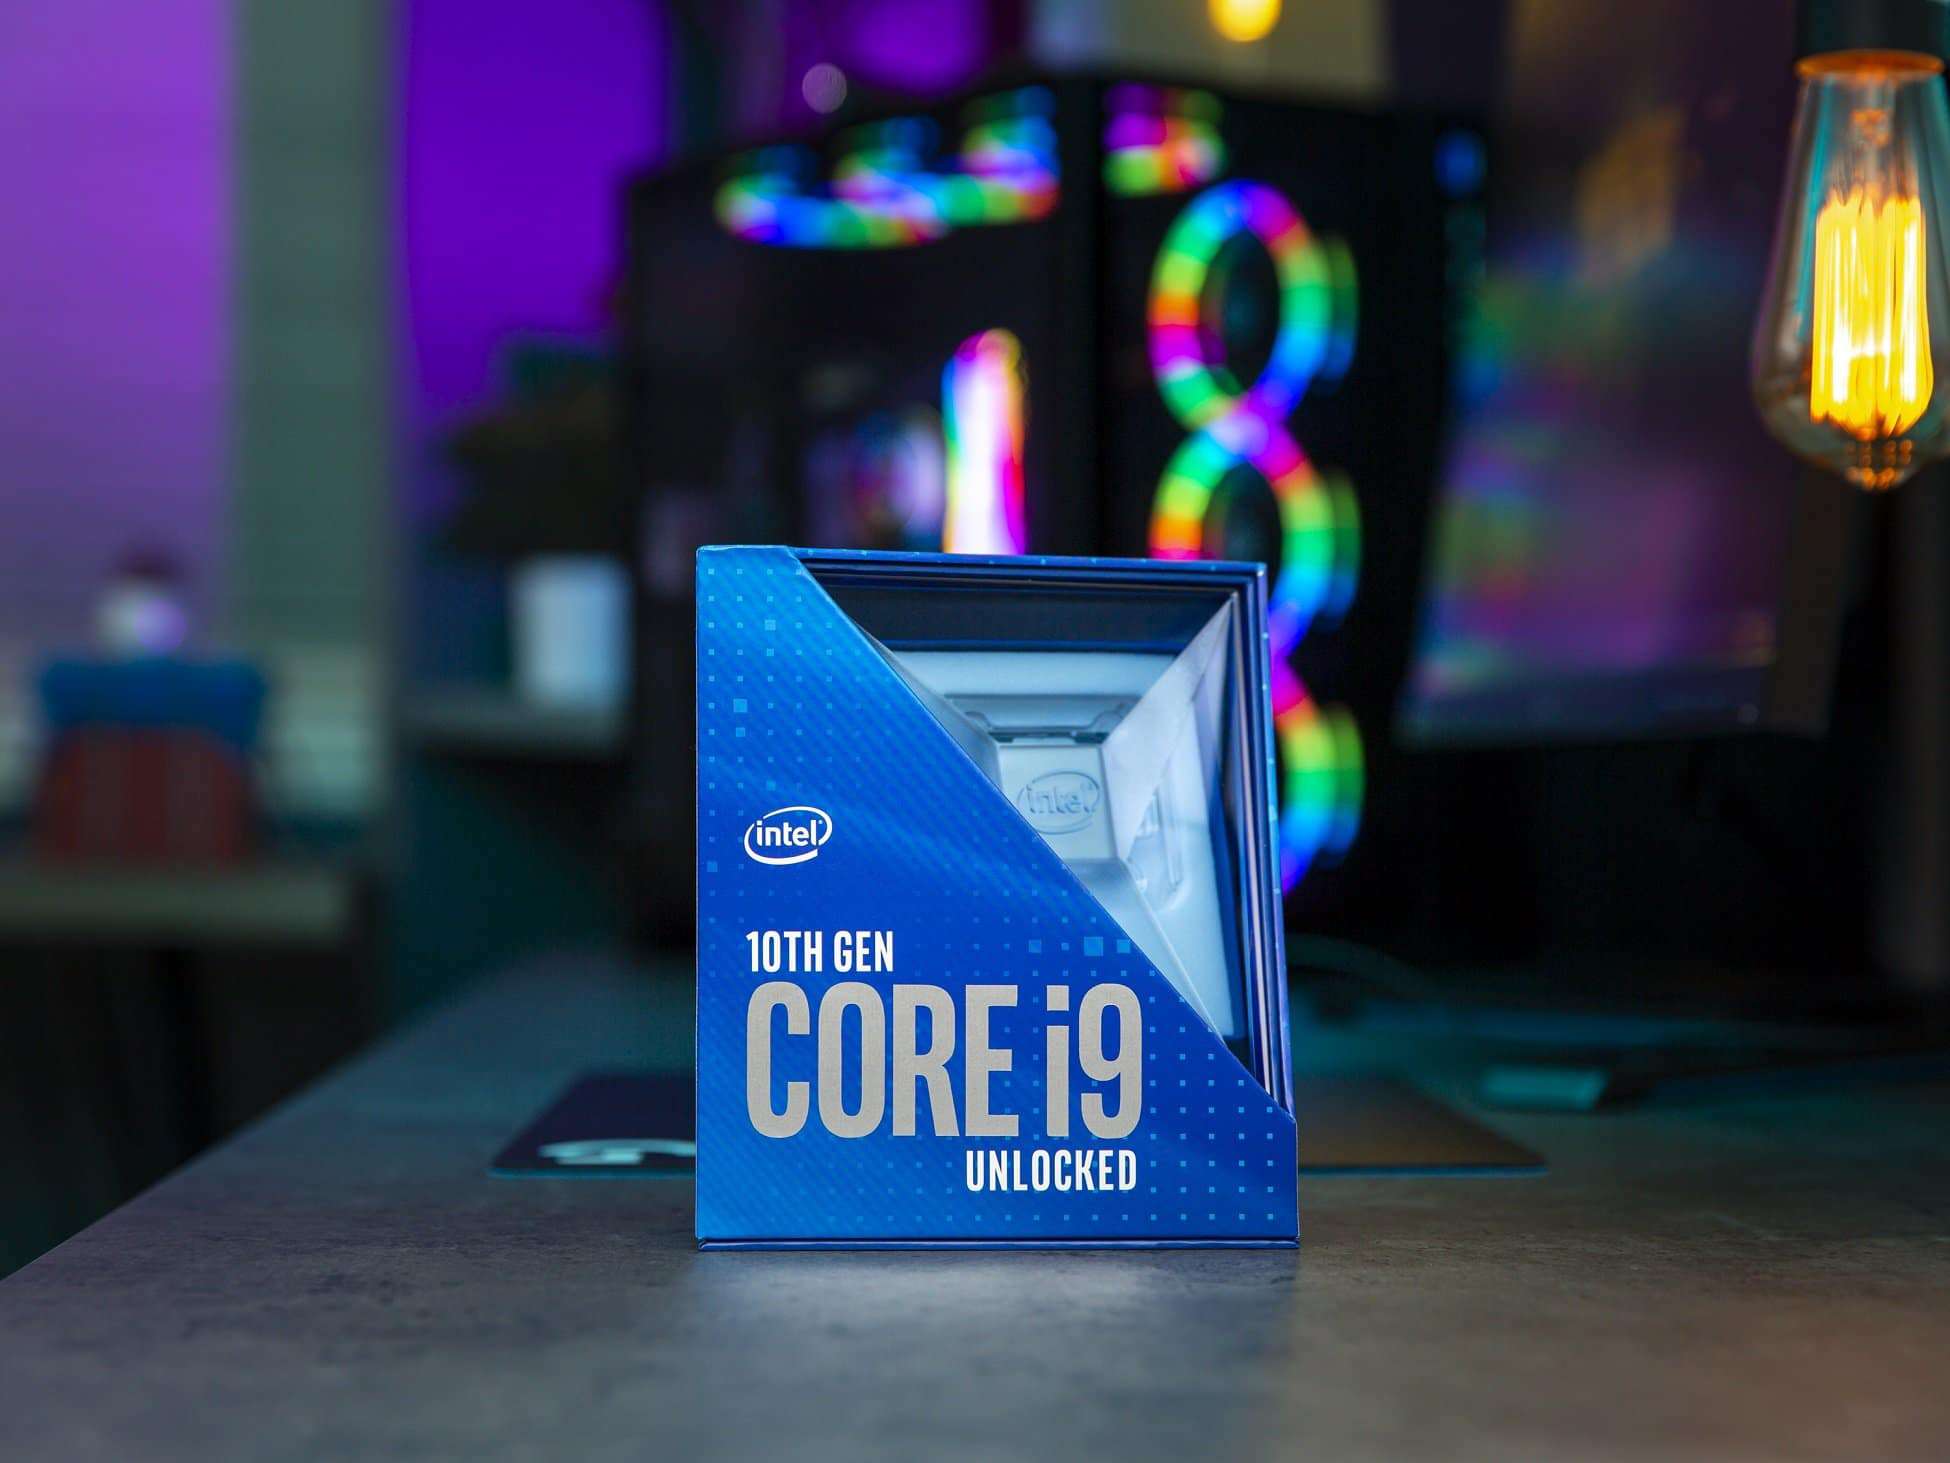 INTEL DELIVERS WORLD’S FASTEST GAMING PROCESSOR